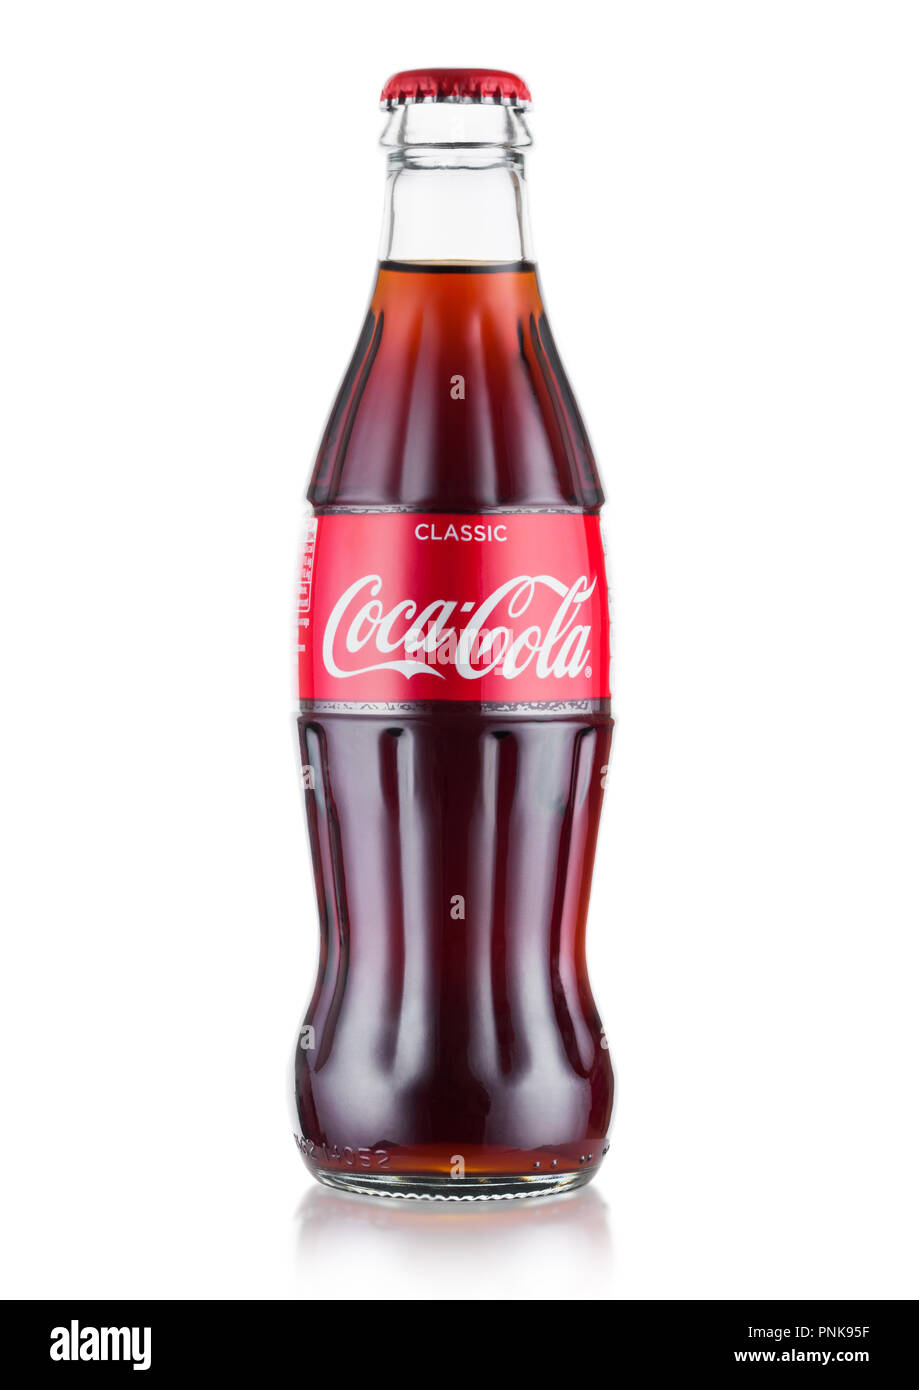 LONDON, UK - AUGUST 10, 2018: Bottle of Original Coca Cola soft drink on white. Stock Photo